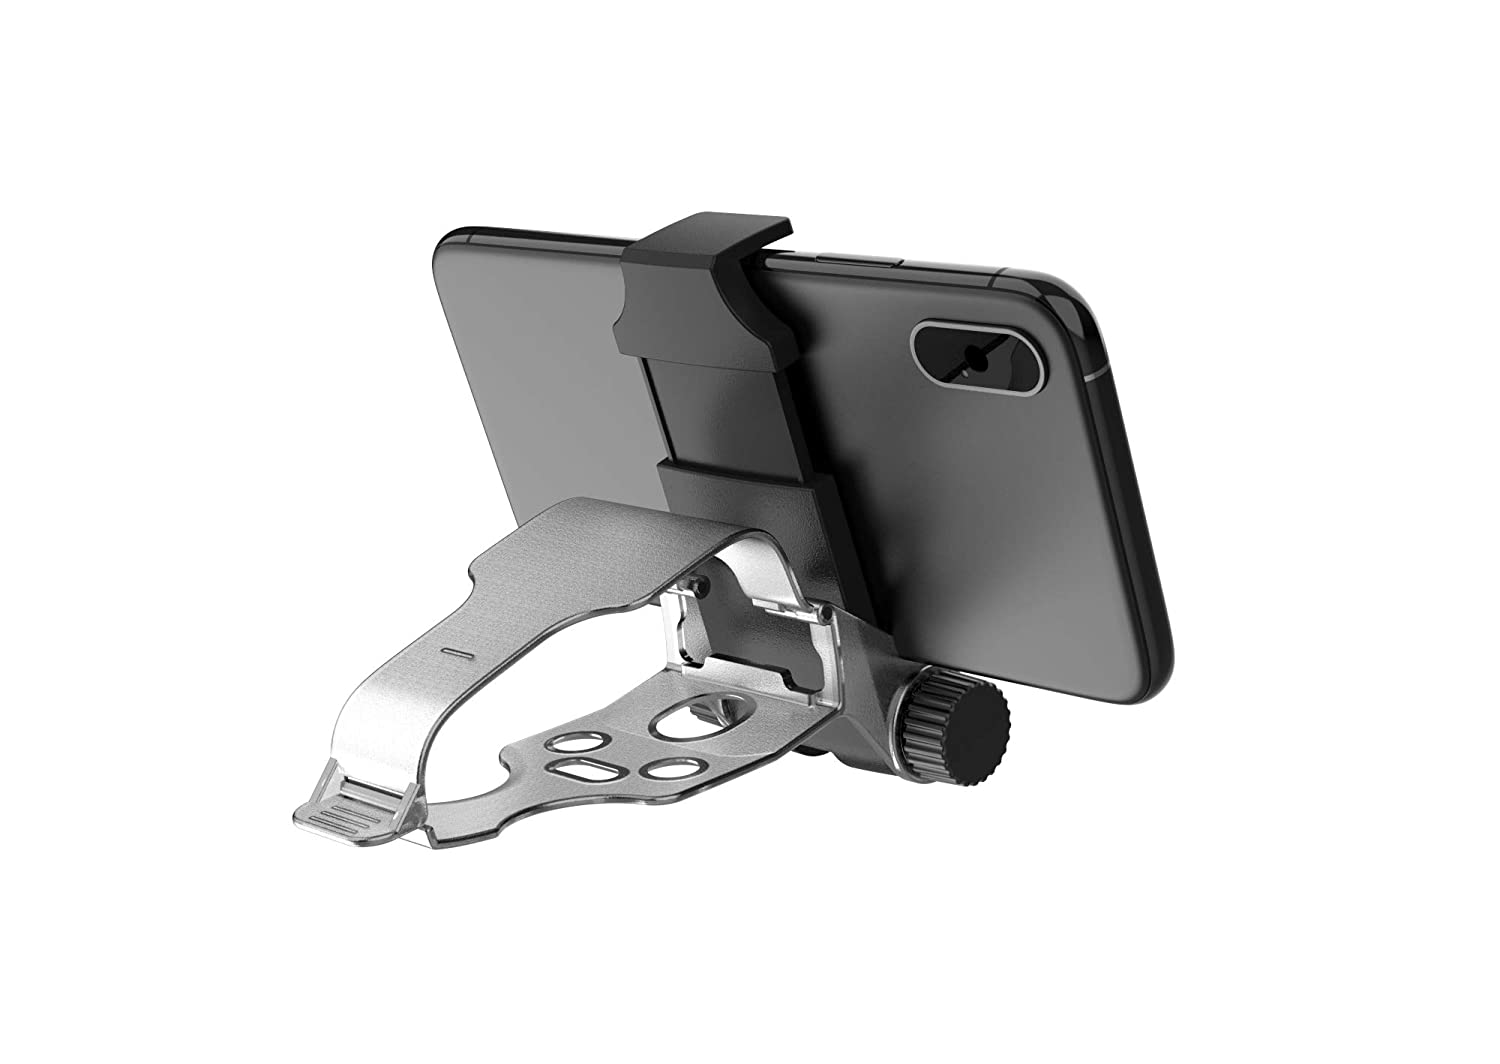 Surge Xbox One Controller Phone Mount and Stand for Xbox One - Pro-Distributing